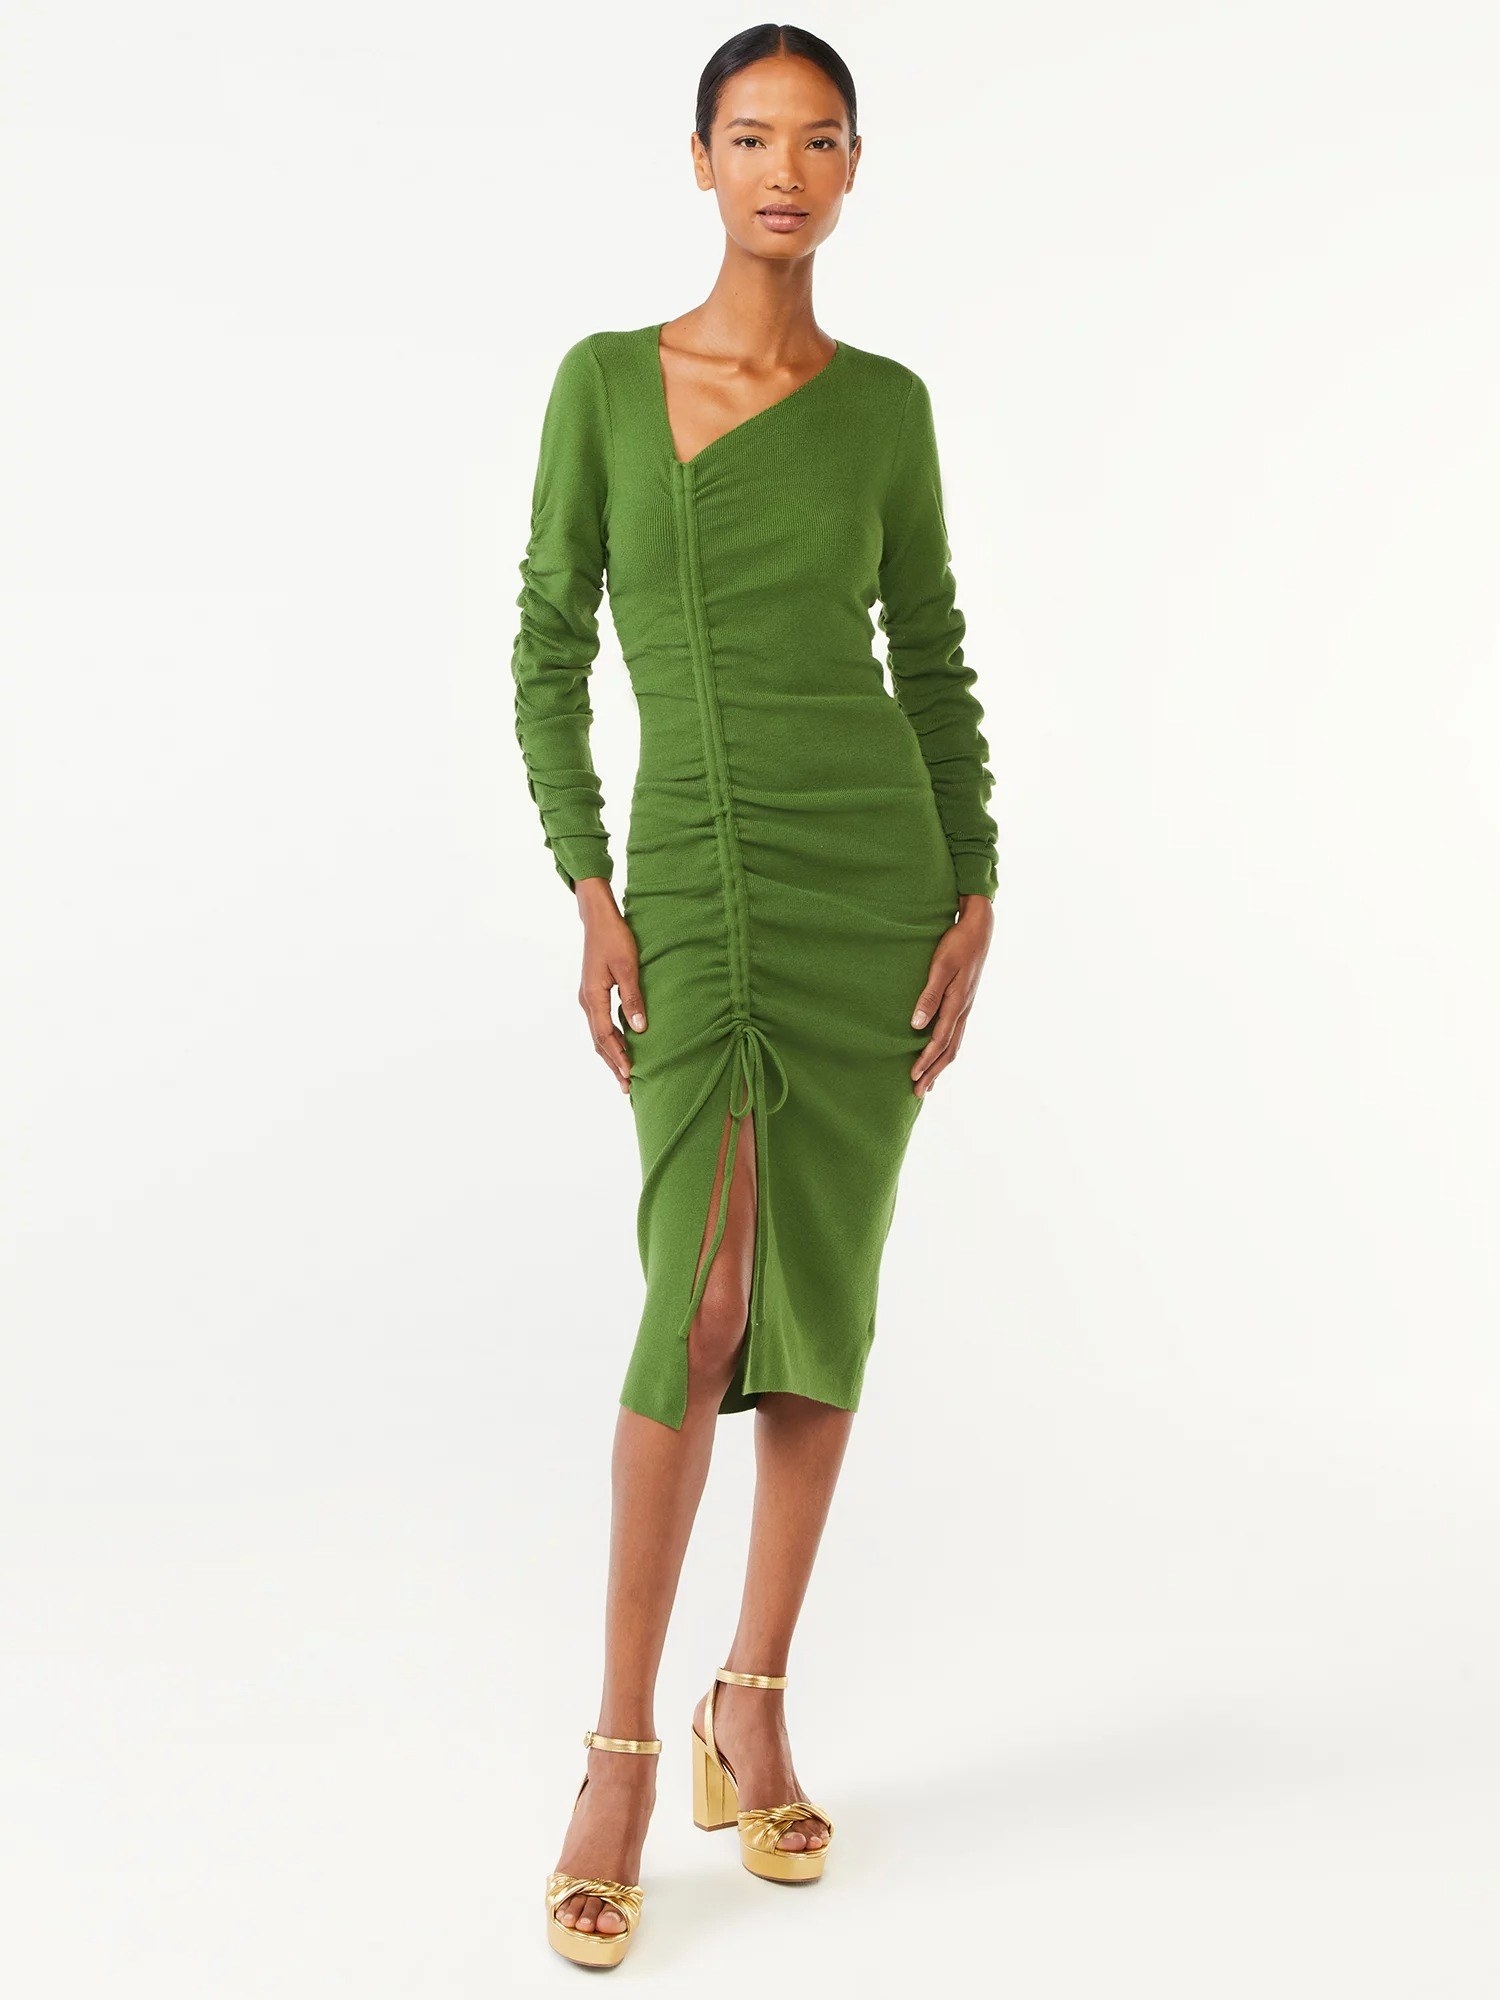 a model wearing the green dress and gold shoes